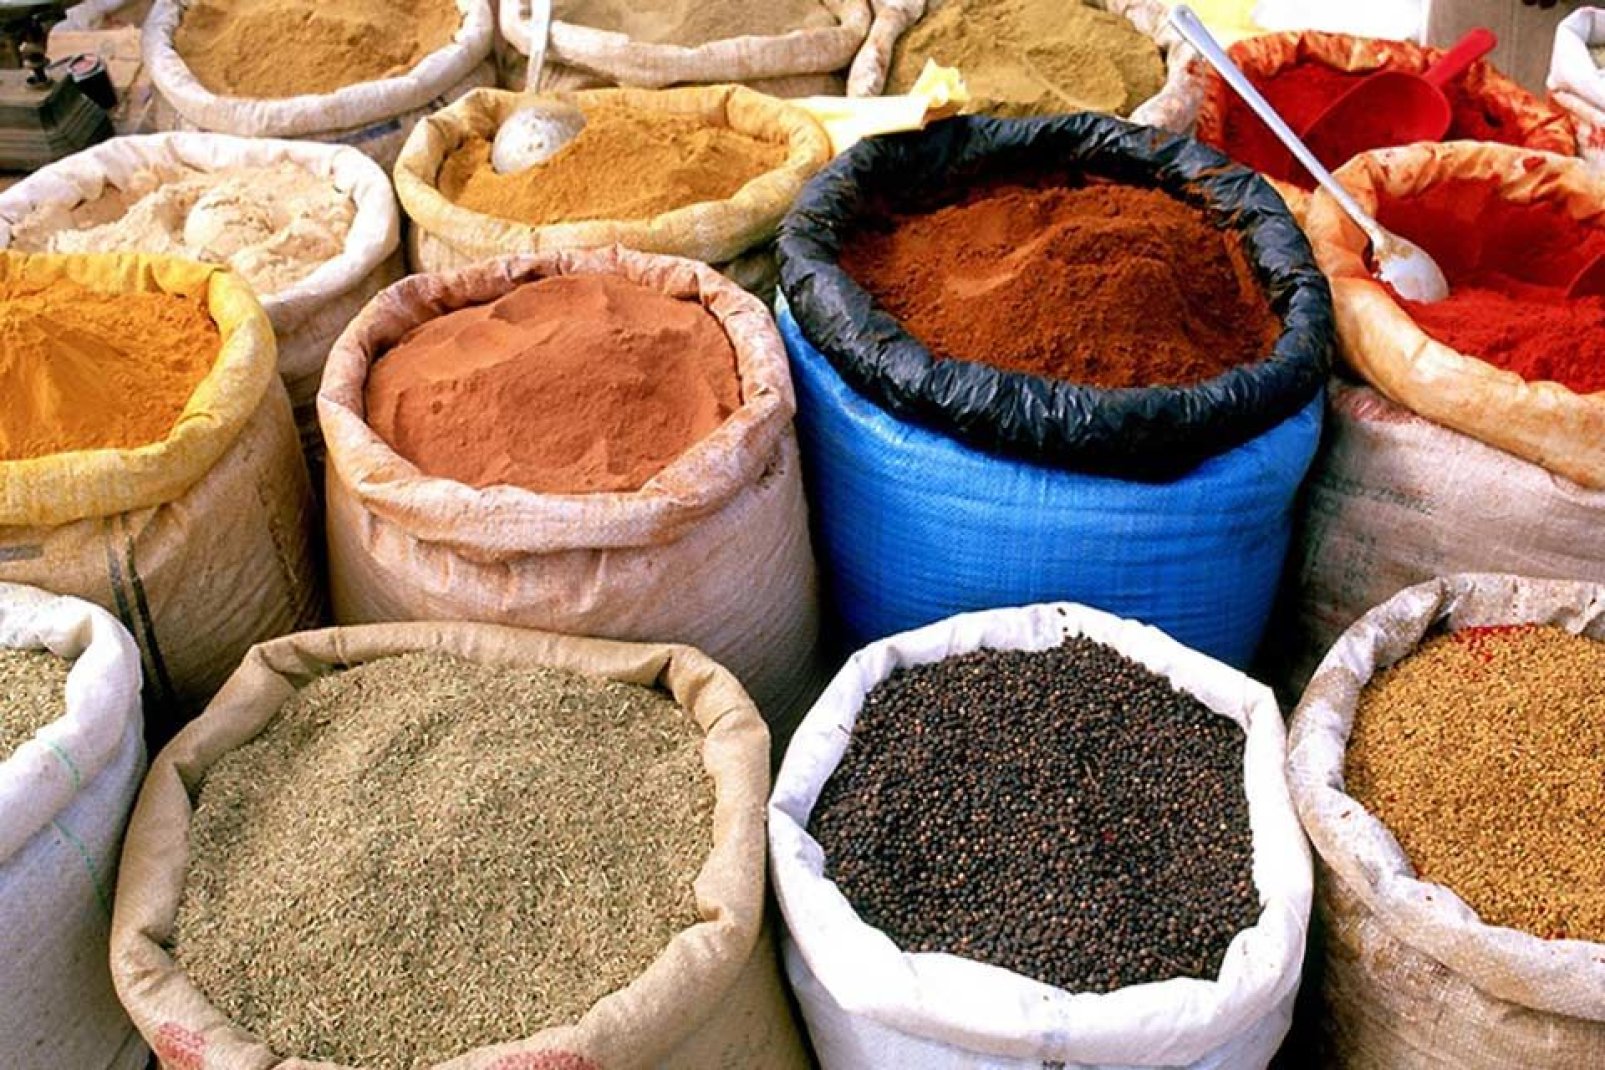 Like those in many Moroccan cities, the Ouarzazate souq is abound with flavours.